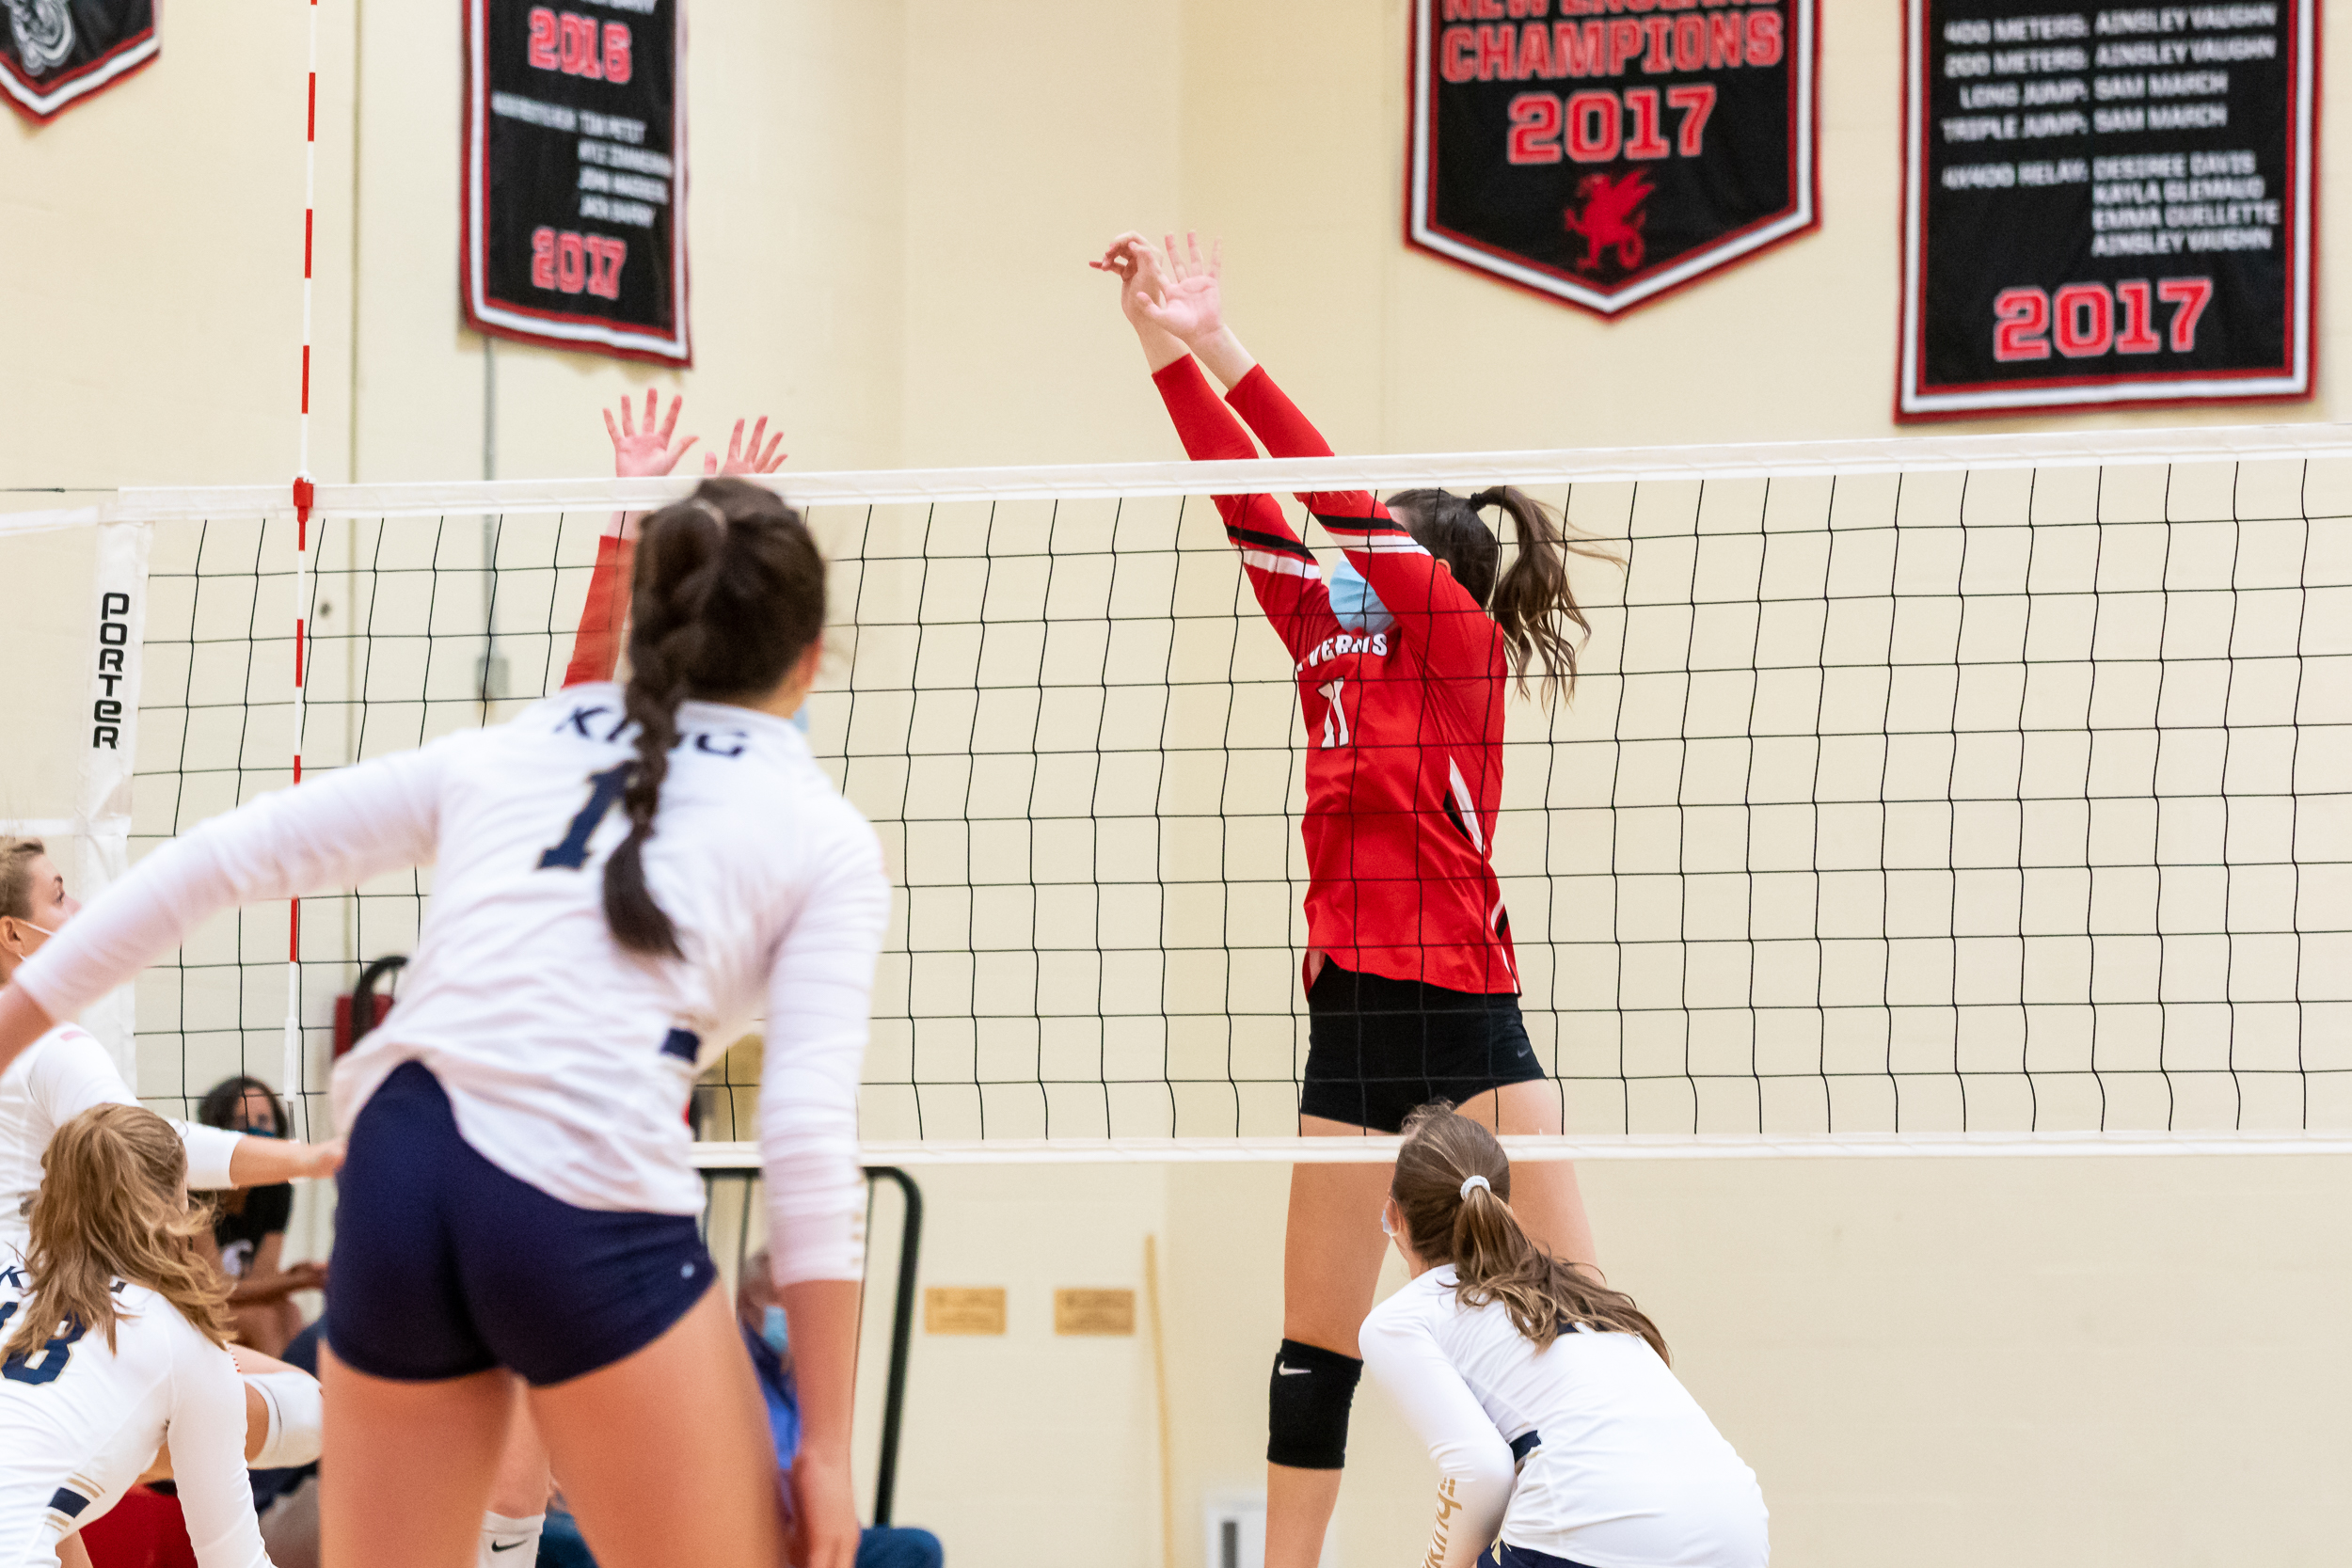 Girls at Kingswood Oxford compete in a highly competitive sports program, including volleyball